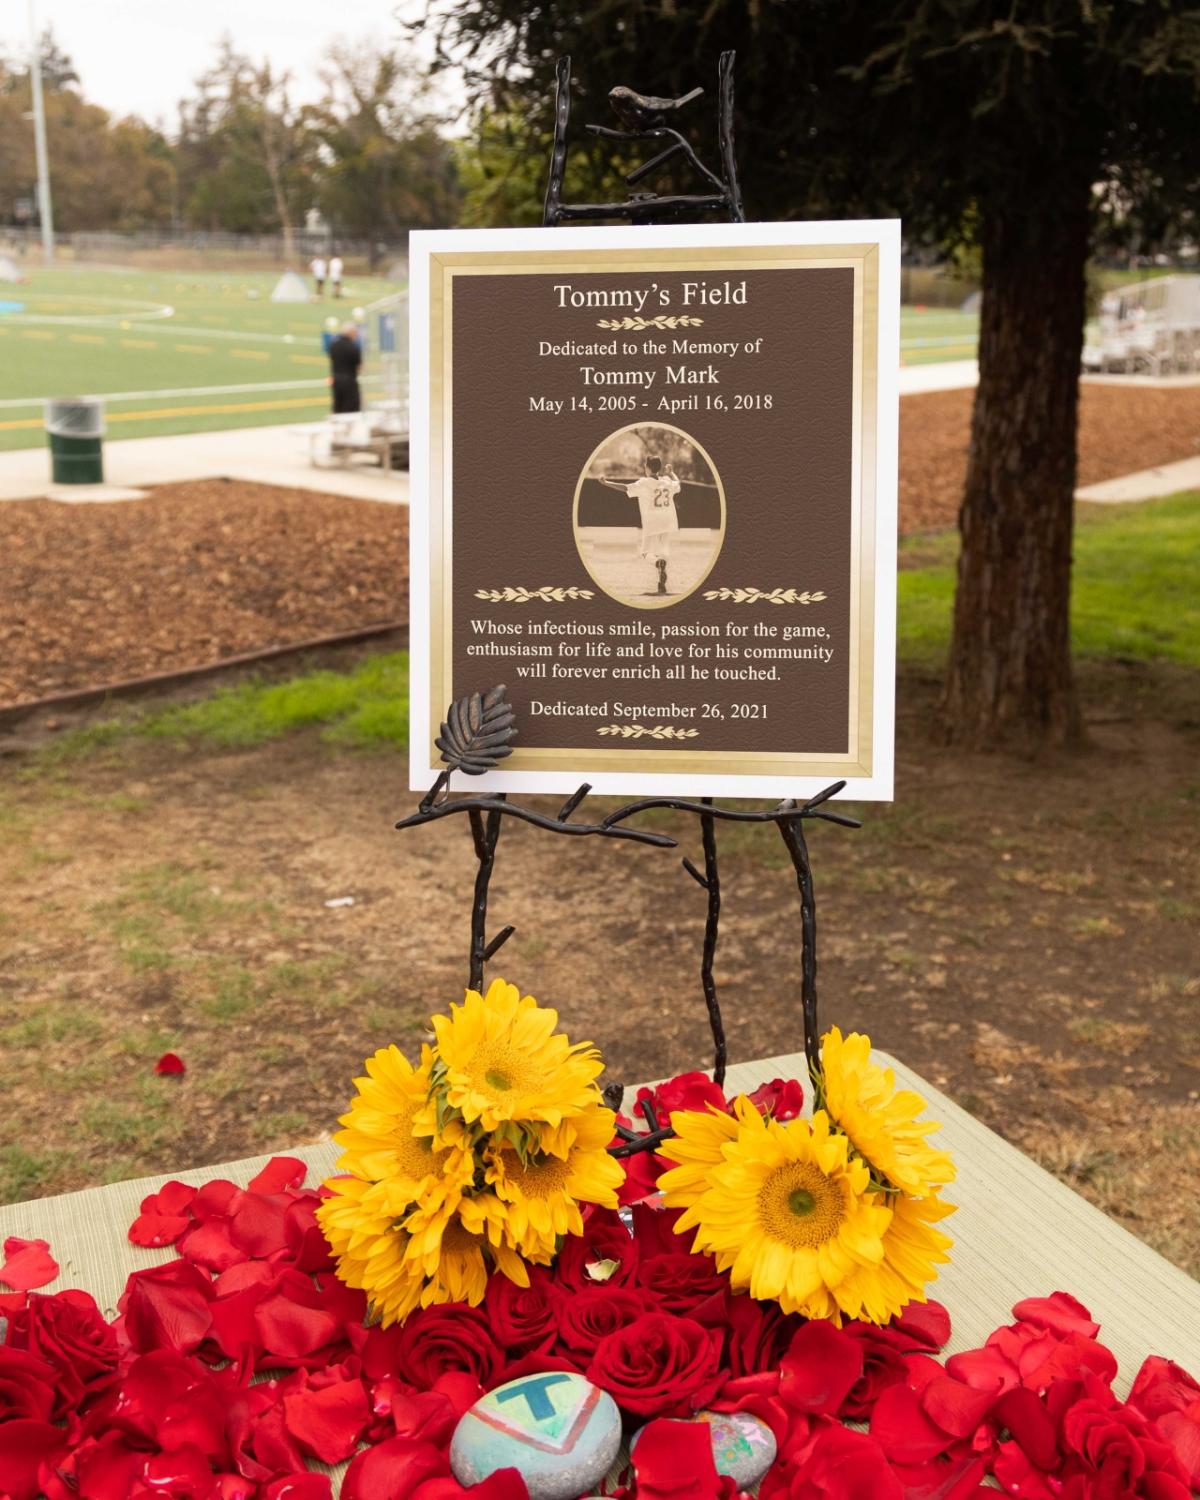 A commemorative plaque for Tommy Mark is positioned by "Tommy's Field" surrounded by flowers. 